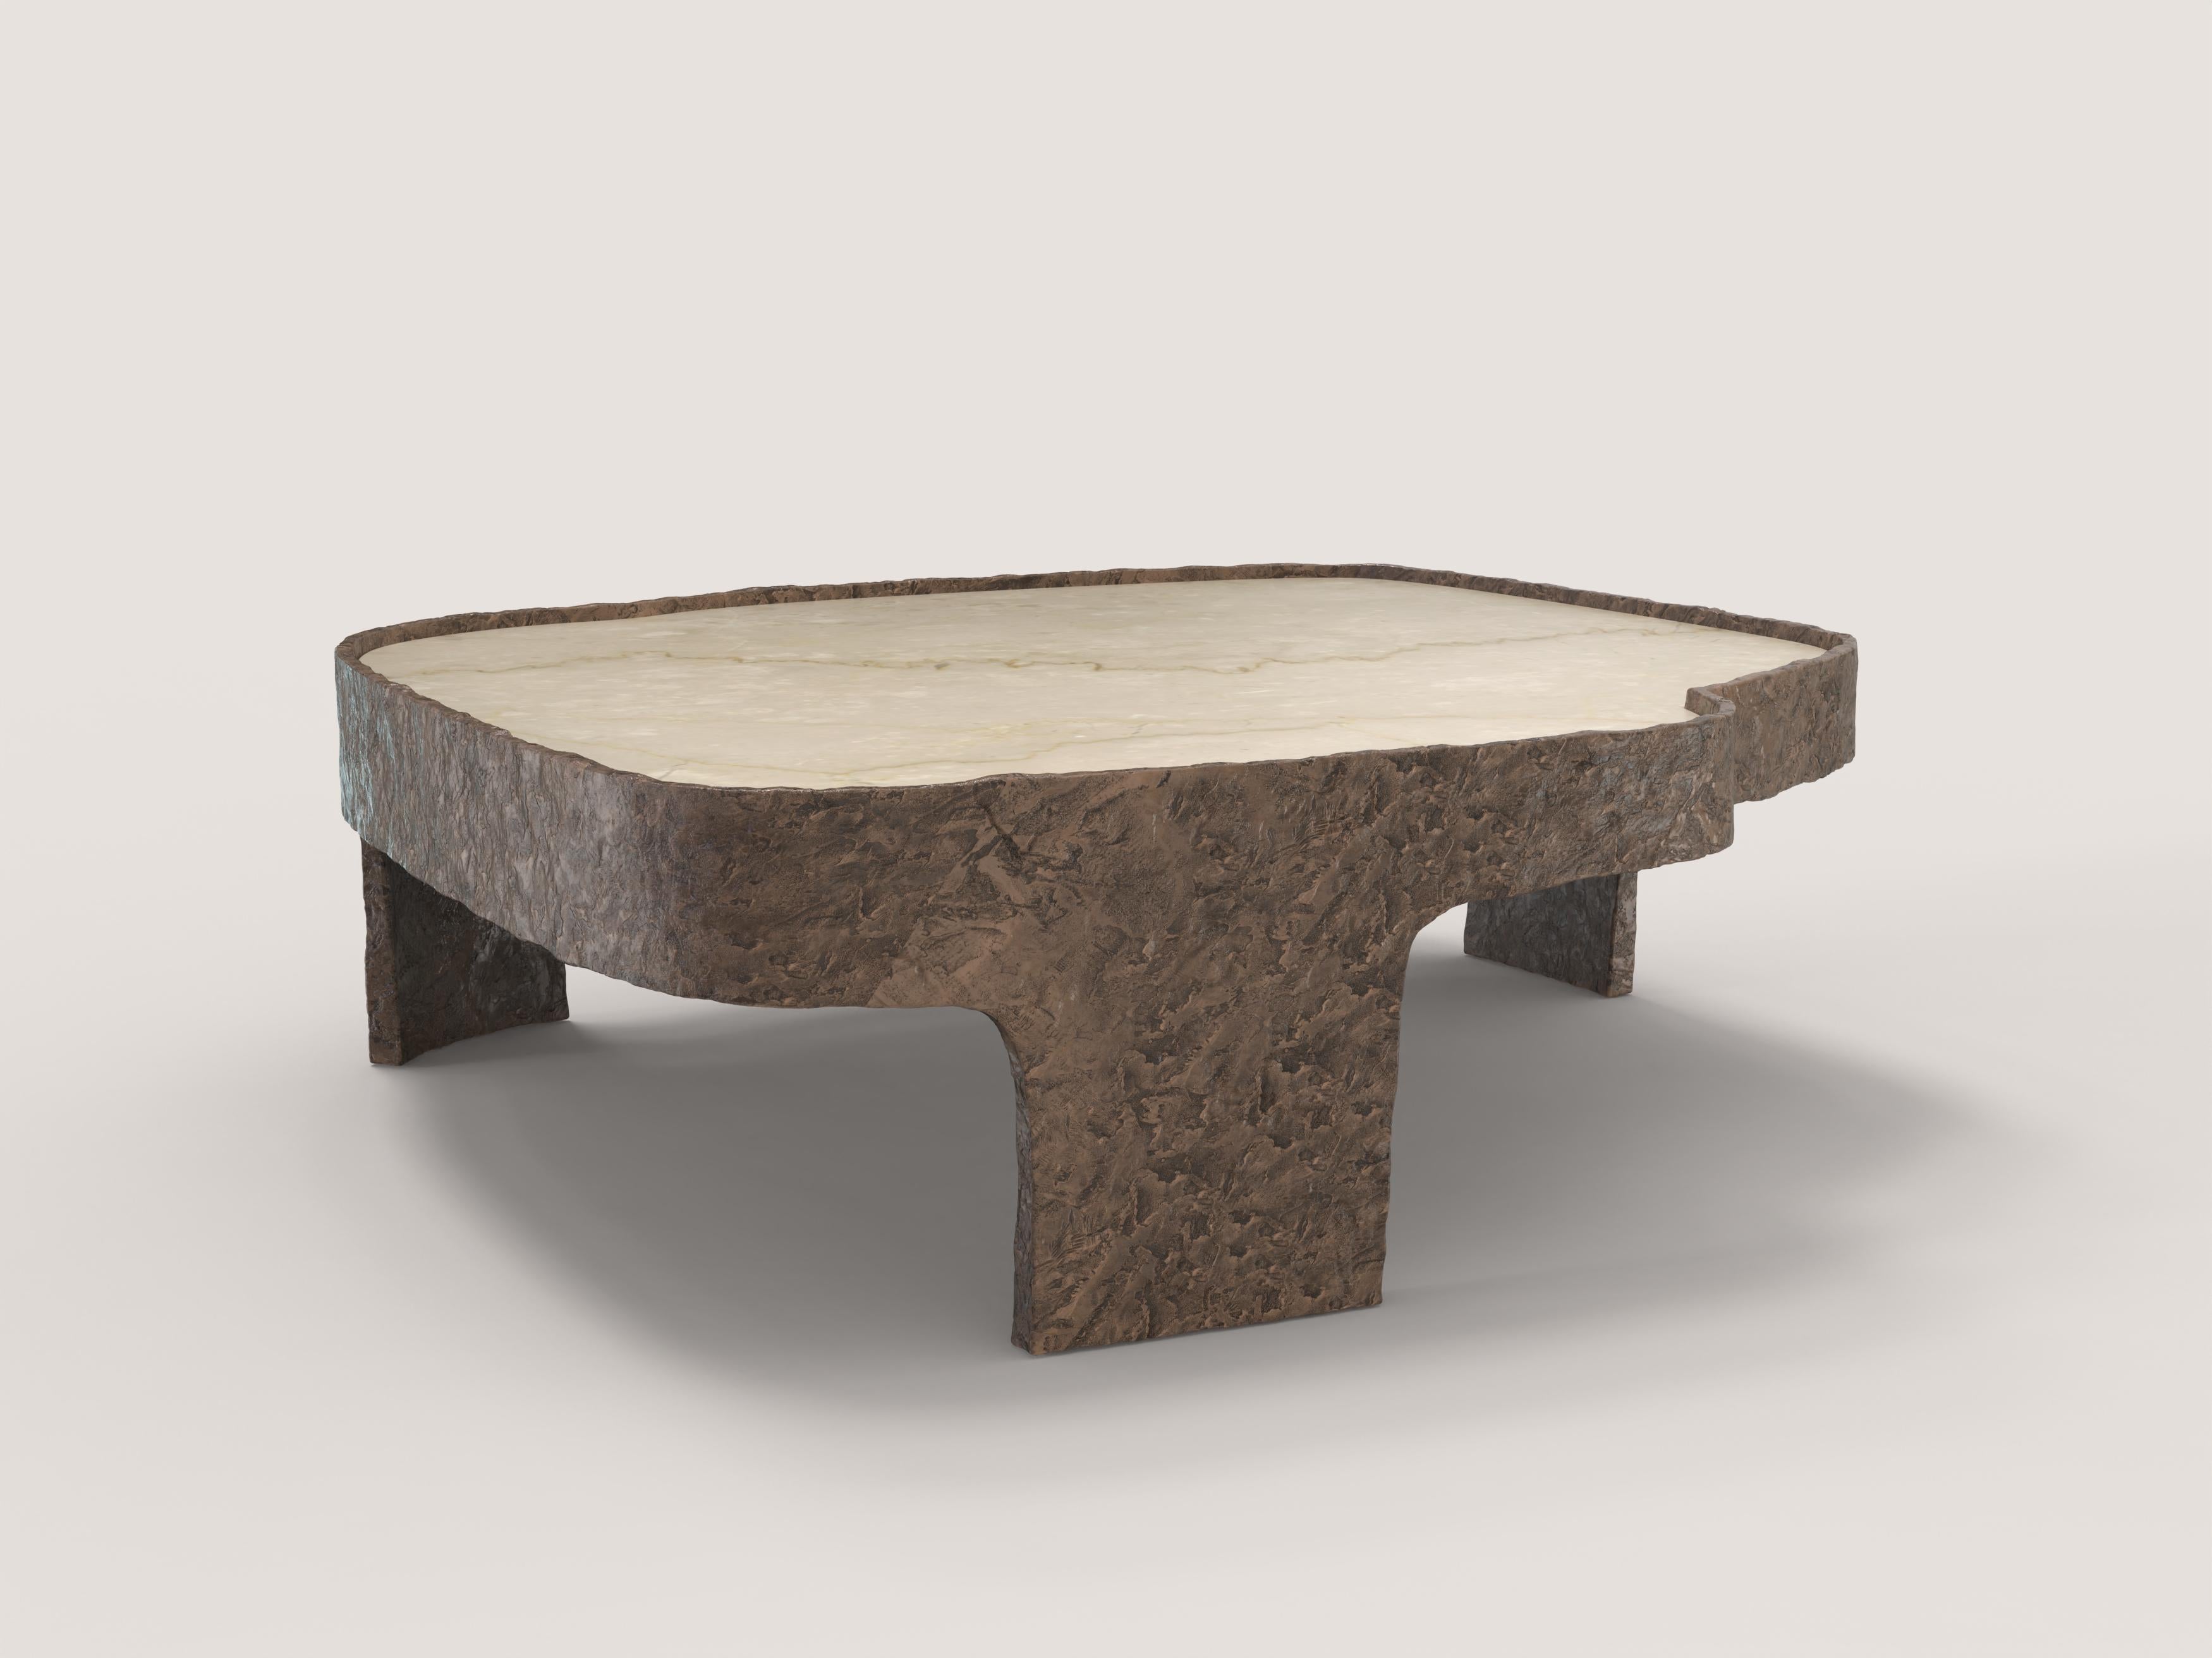 Sumatra V2 is a 21st century side table made by Italian artisans in cast bronze with light brown patina with an extraordinary Botticino Classico marble plane. It is part of the collectible design language Sumatra that has been developed by the